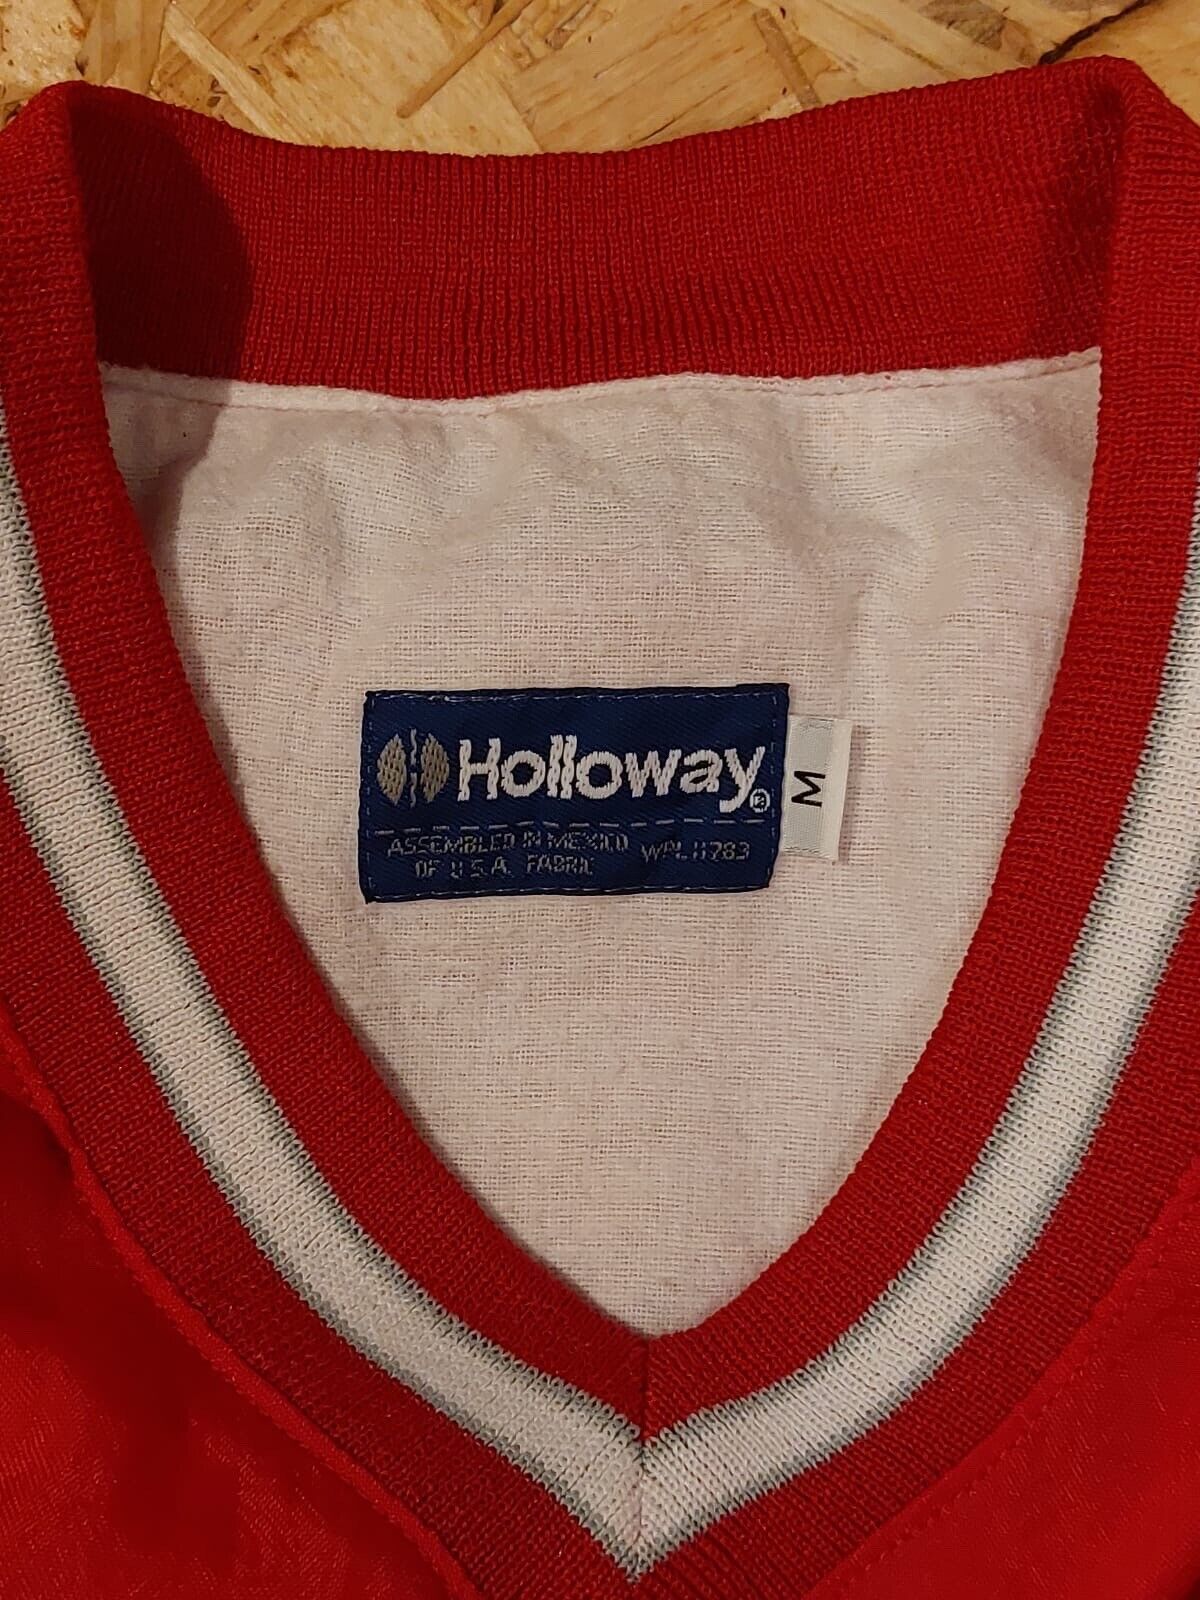 Vintage 90s Sz M Red Pro Sports Player Plymouth Holloway Pullover Jacket retro